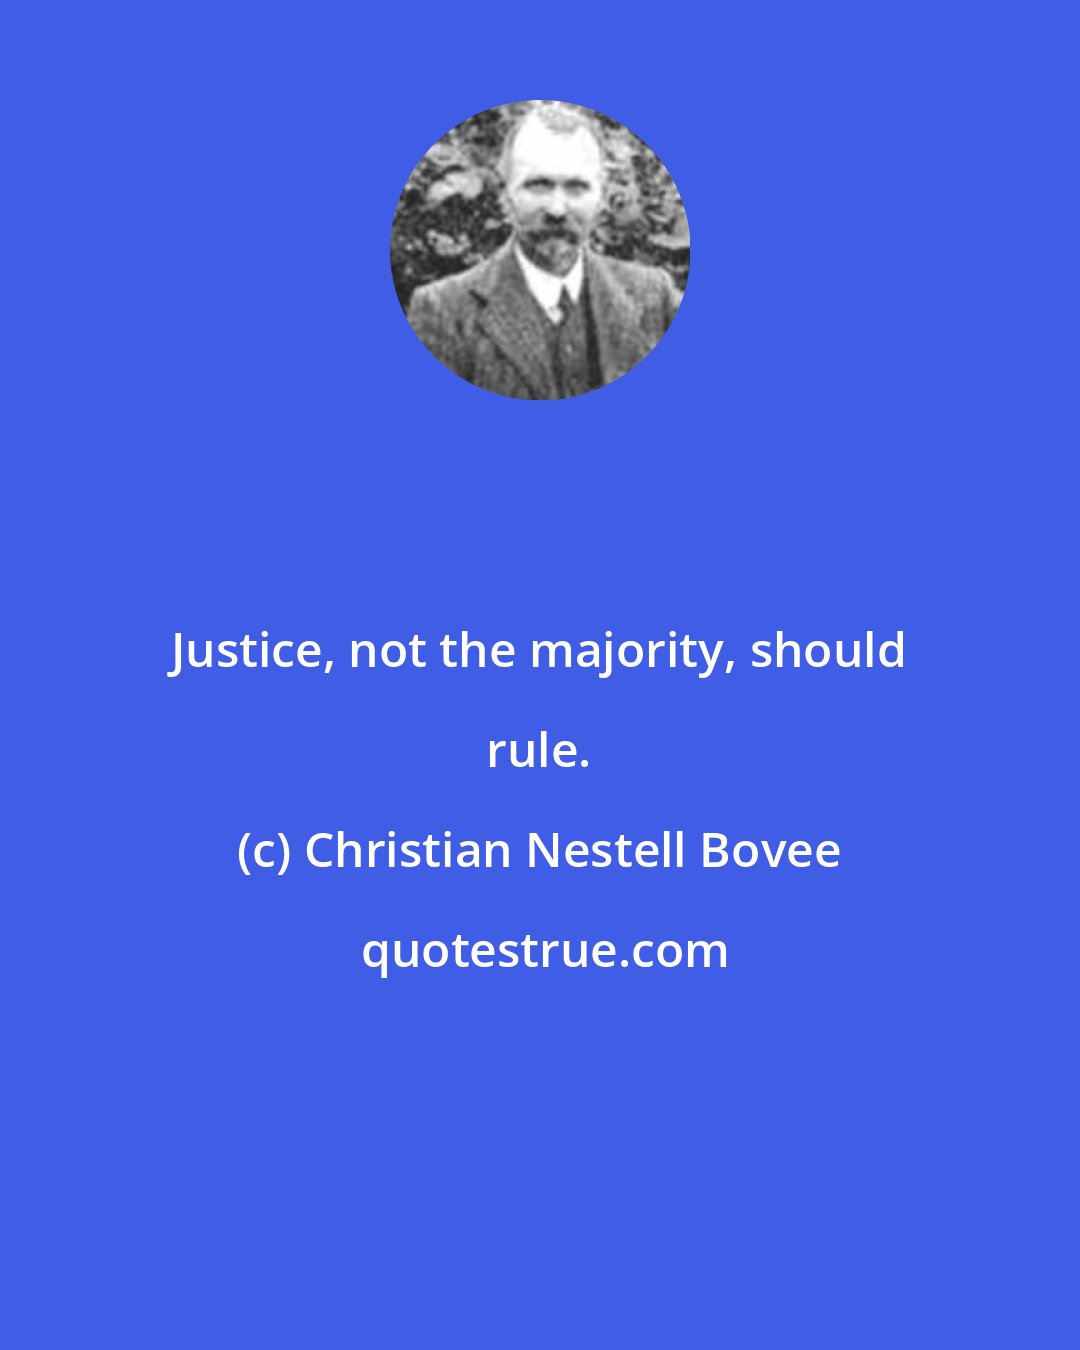 Christian Nestell Bovee: Justice, not the majority, should rule.